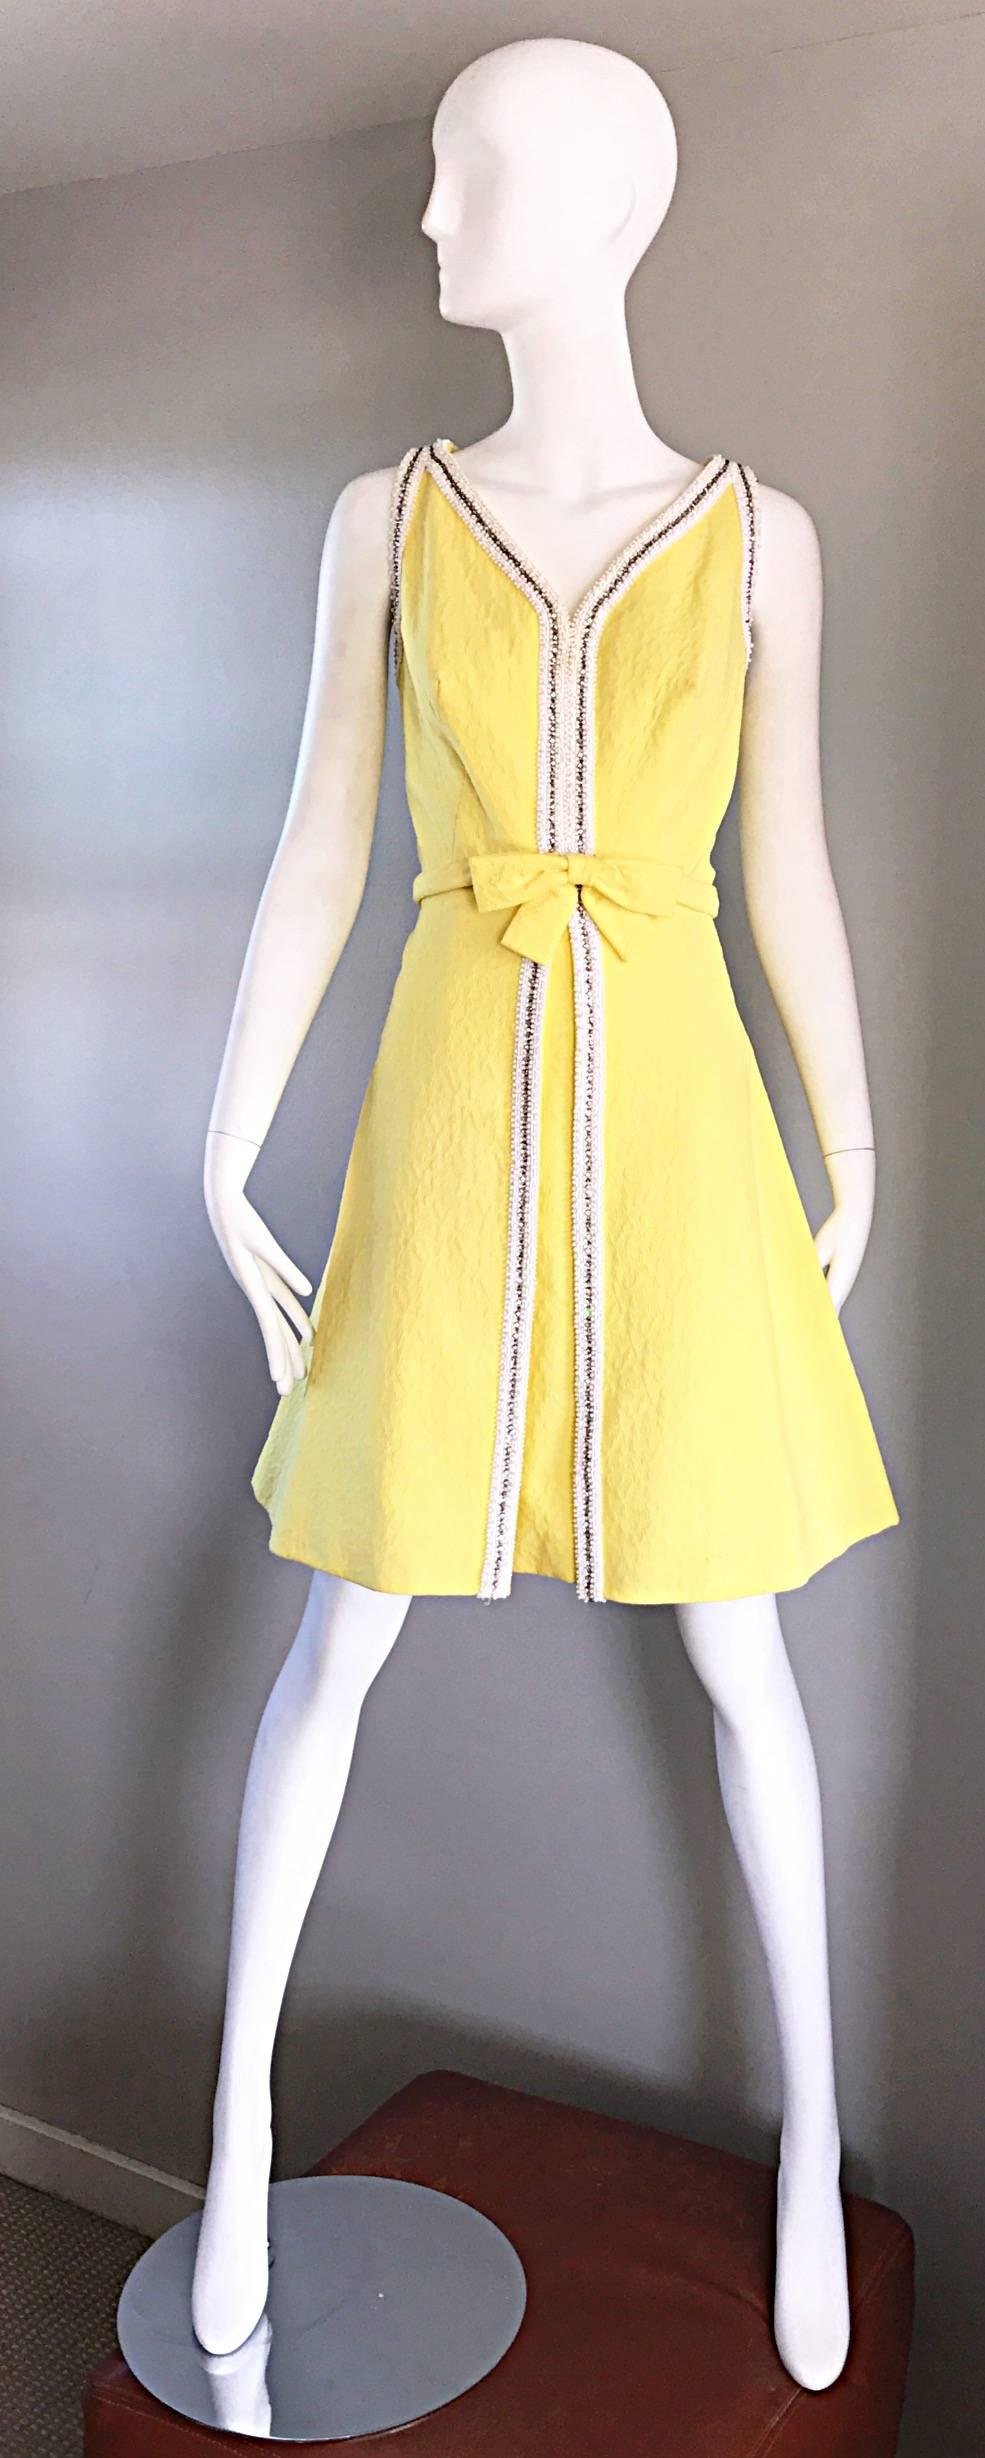 Chic vintage 1960s SEATON ENTERPRISES LTD. Couture canary yellow beaded and rhinestone A-Line dress! Textured yellow cotton rayon blend, with thousands of hand-sewn rhinestones and white beads down the center, and around the collar. Attached bow